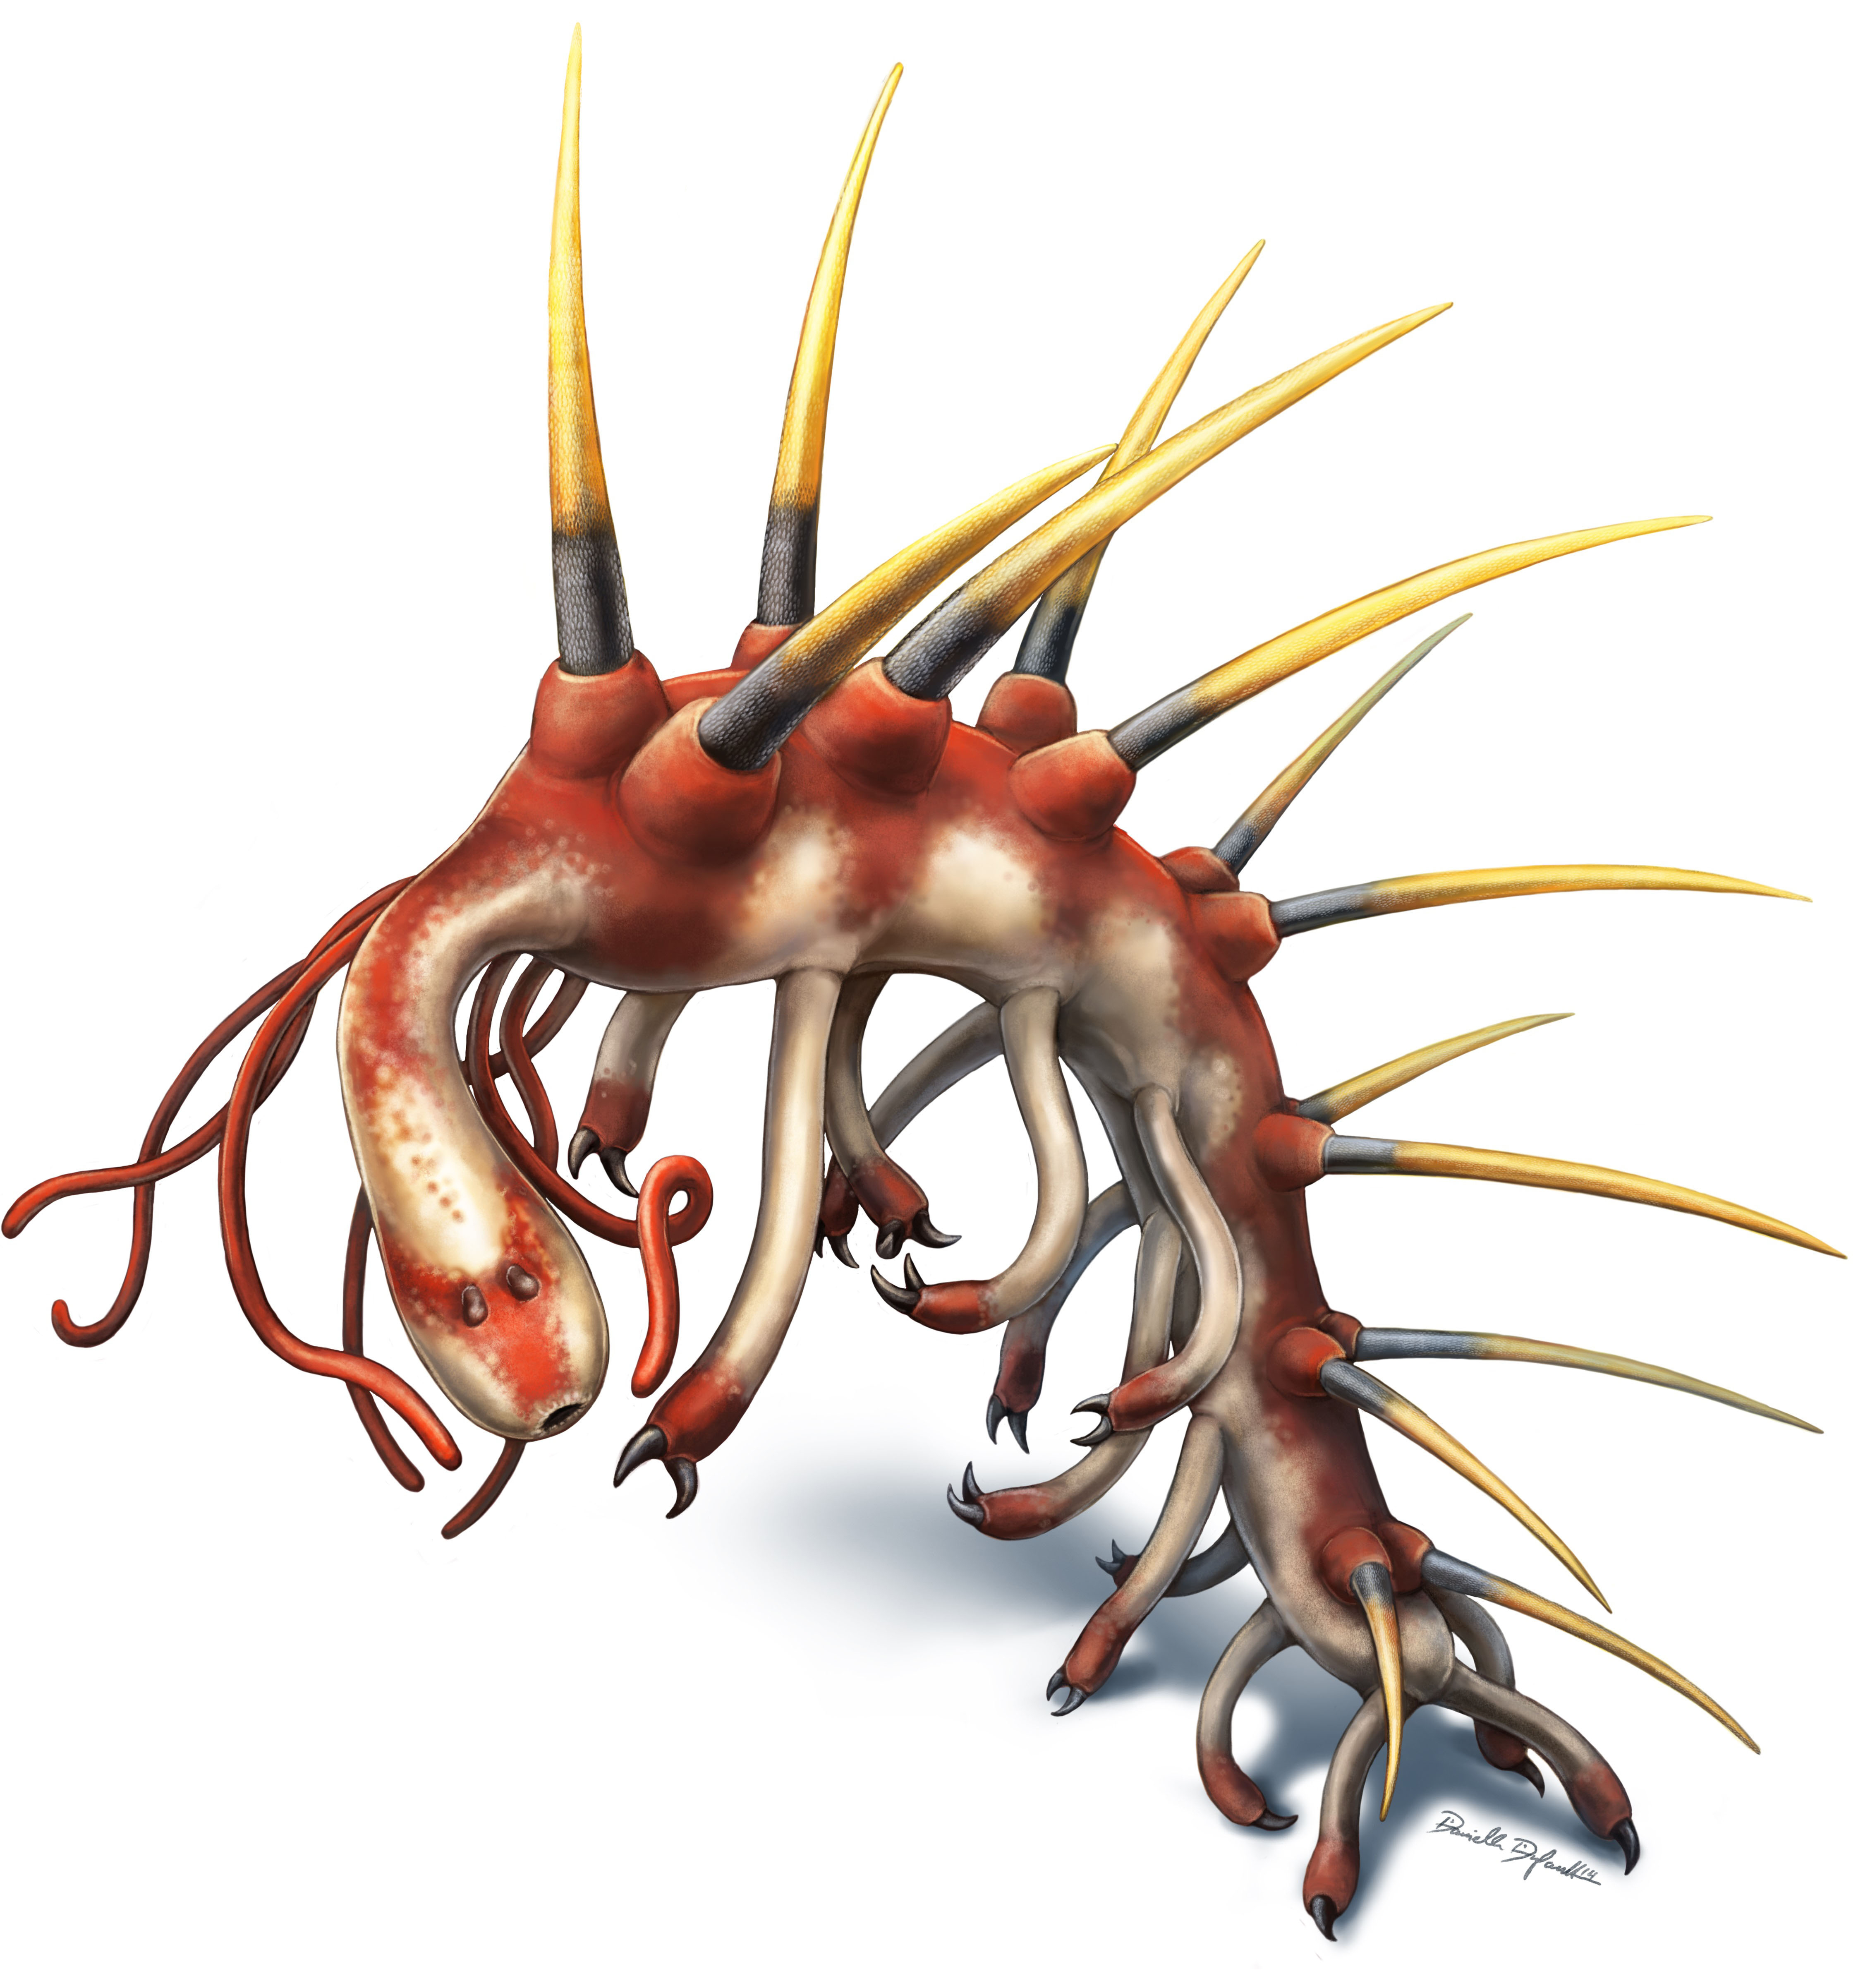 This image provided by Danielle Dufault shows a rendering of a Hallucigenia sparsa worm which lived 508 million years ago. (Danielle Dufault—AP)